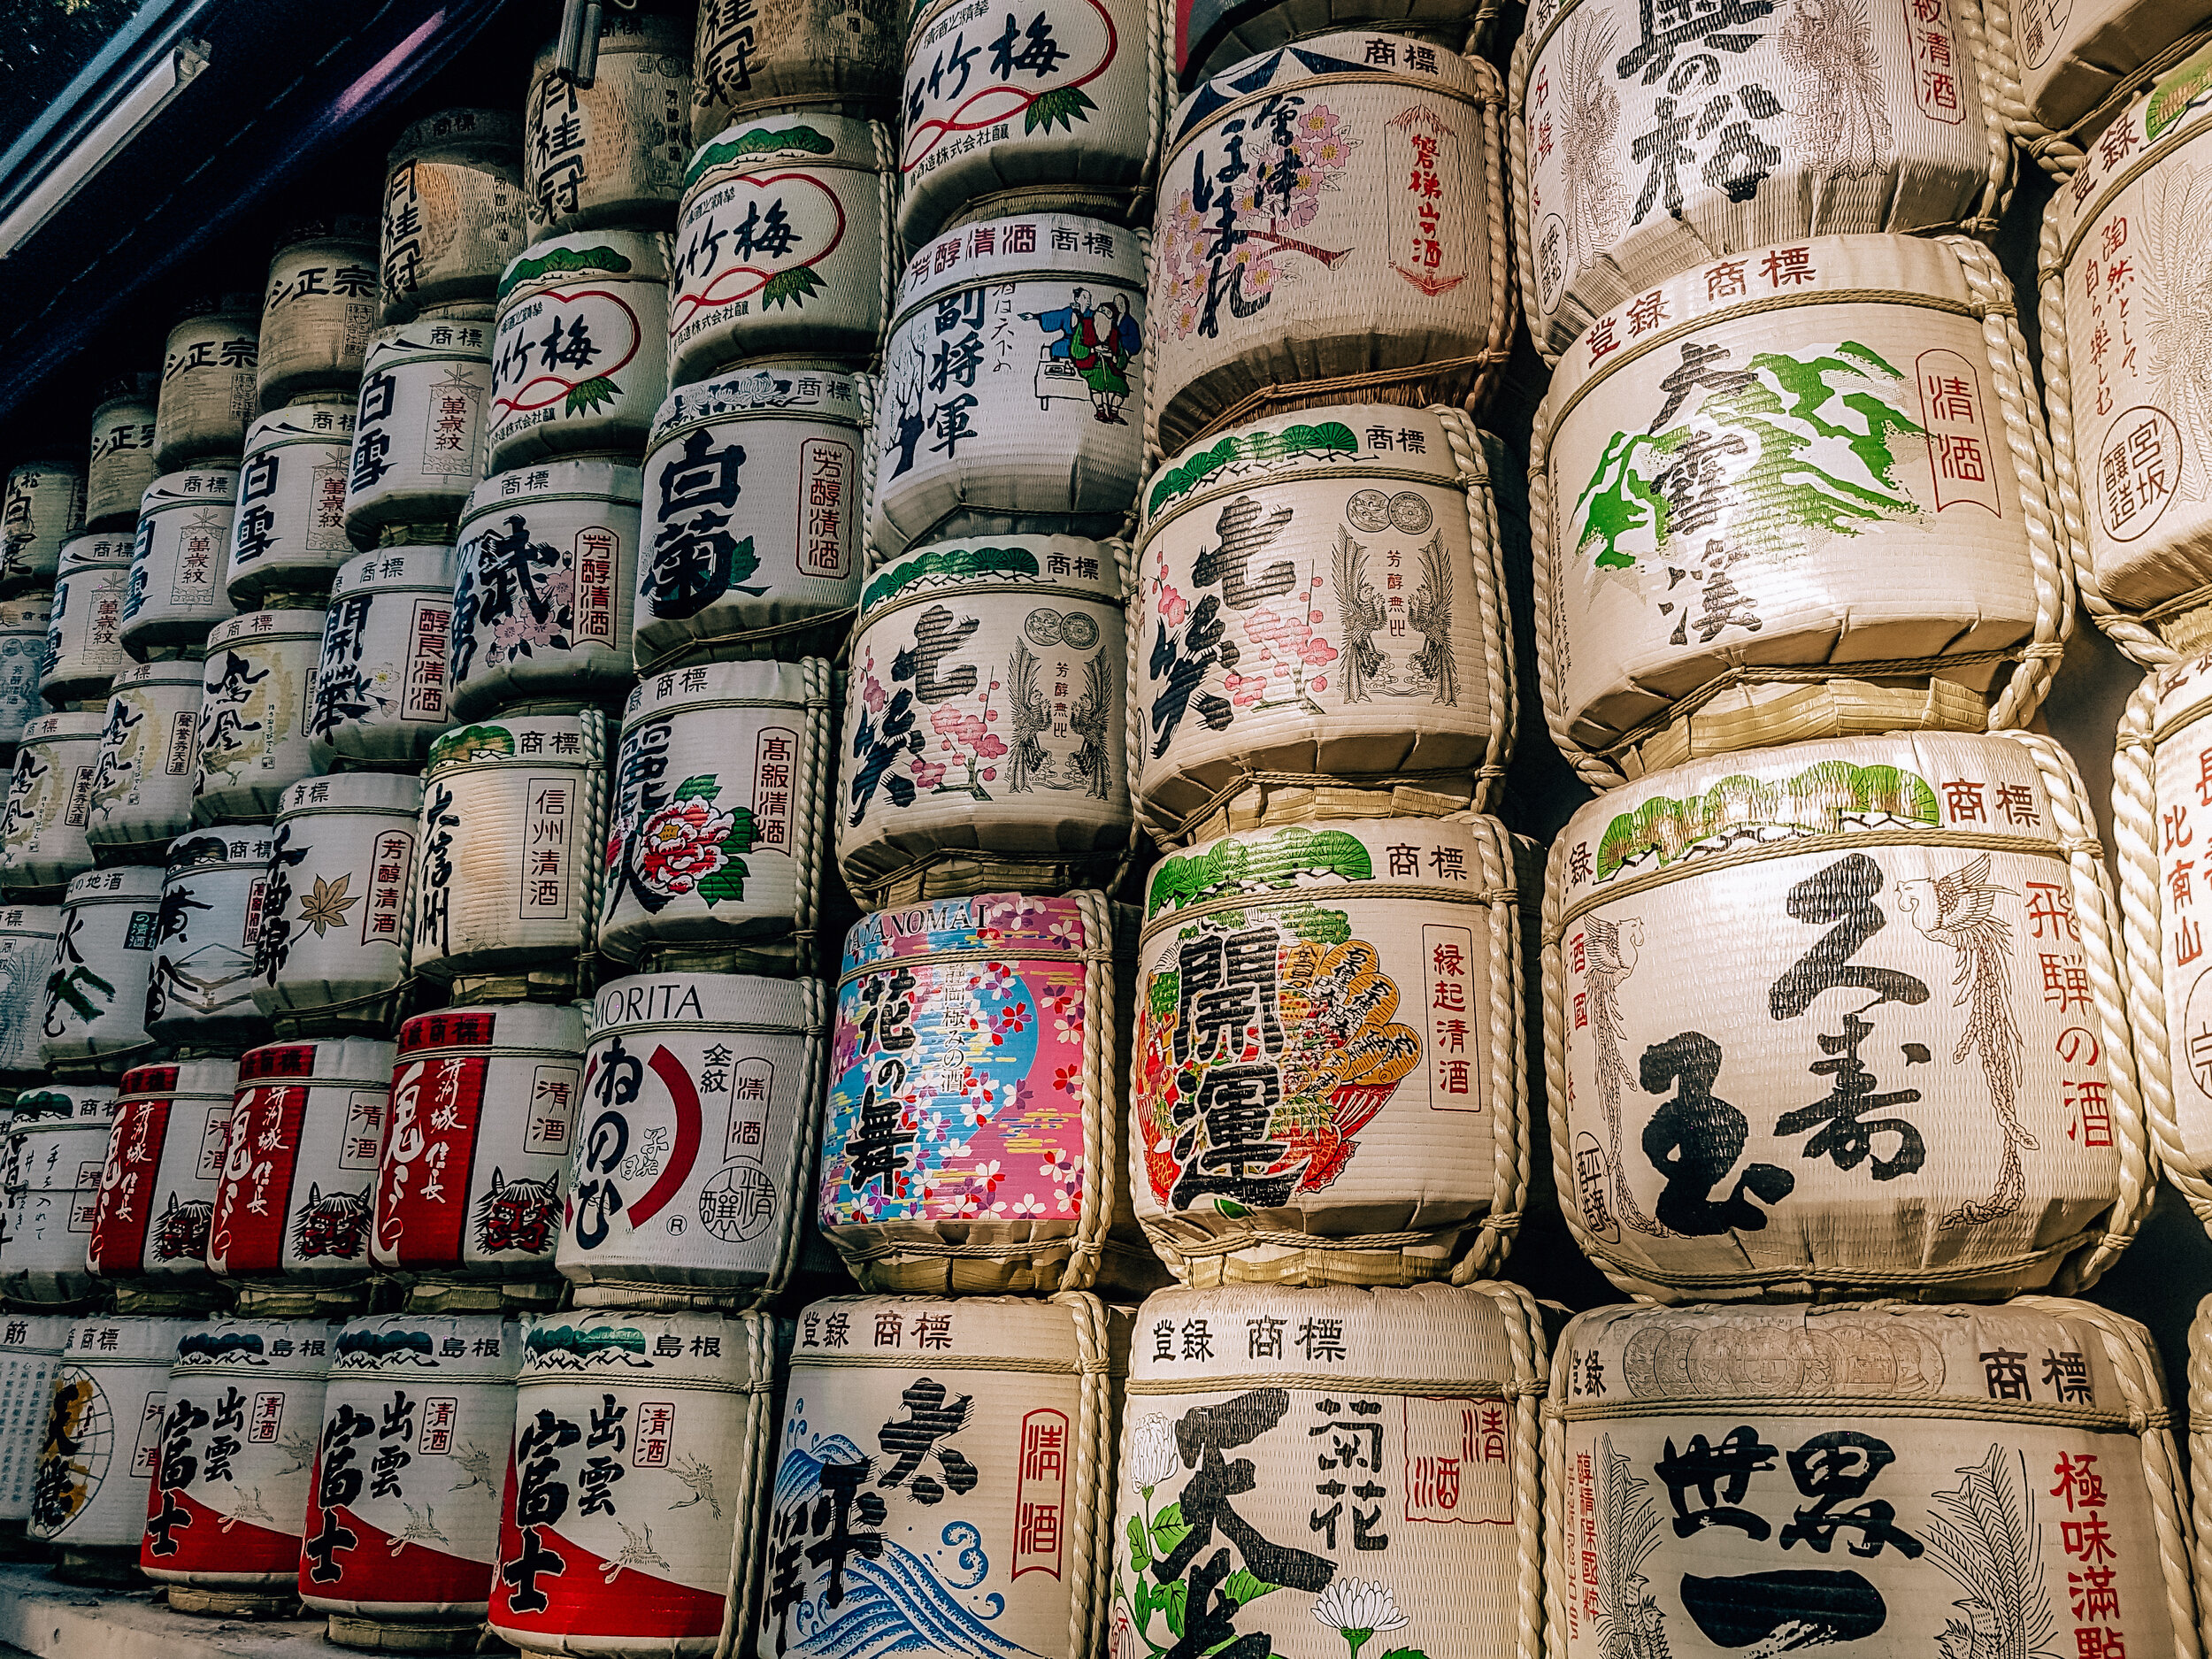 Many large colorful sake barrels stacked on top of each other